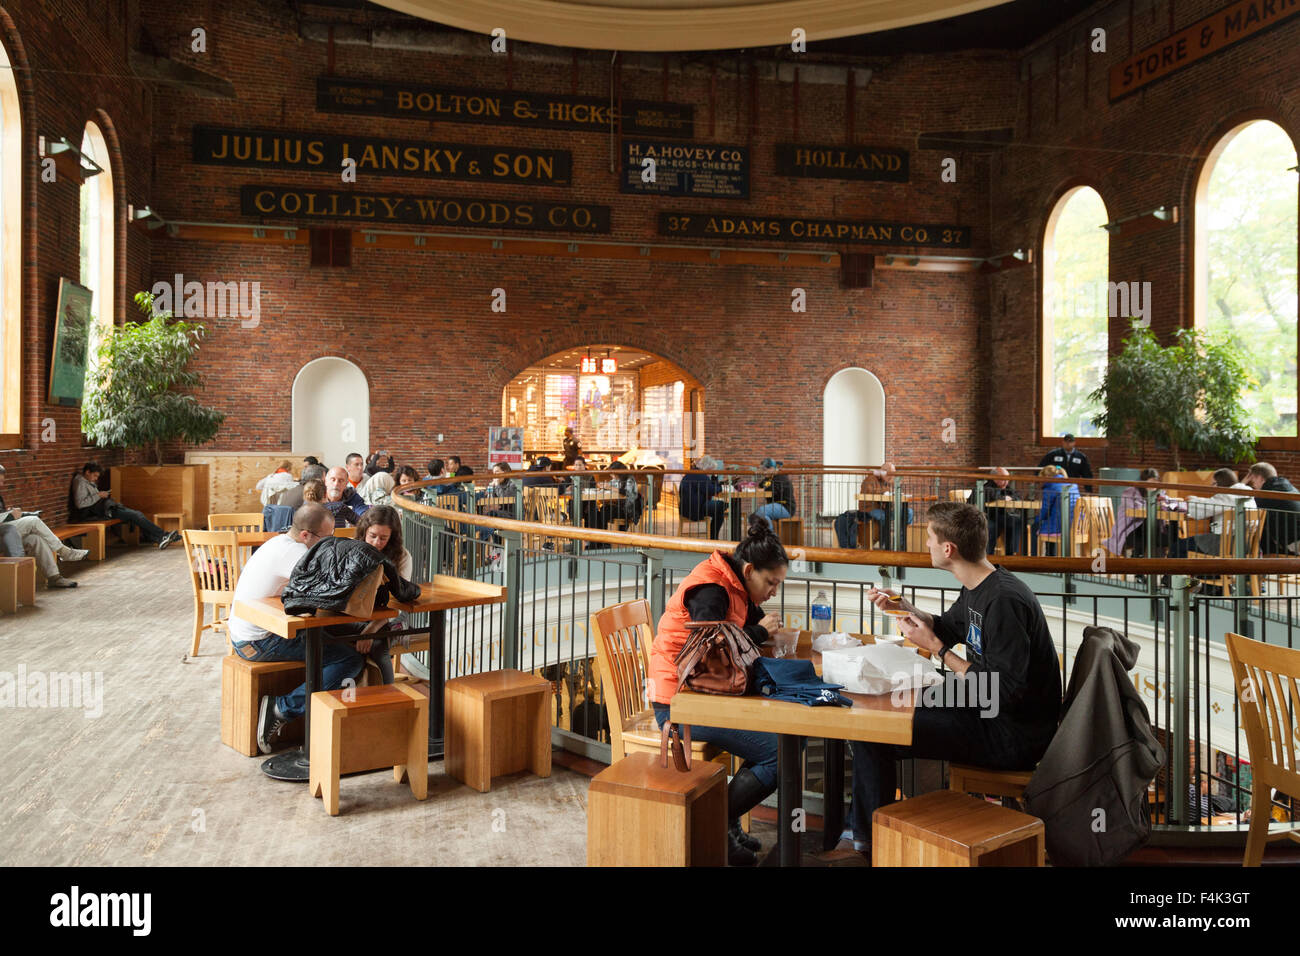 Customers eating and drinking in the restaurant in the rotunda, Quincy Market, Boston, Massachusetts USA Stock Photo